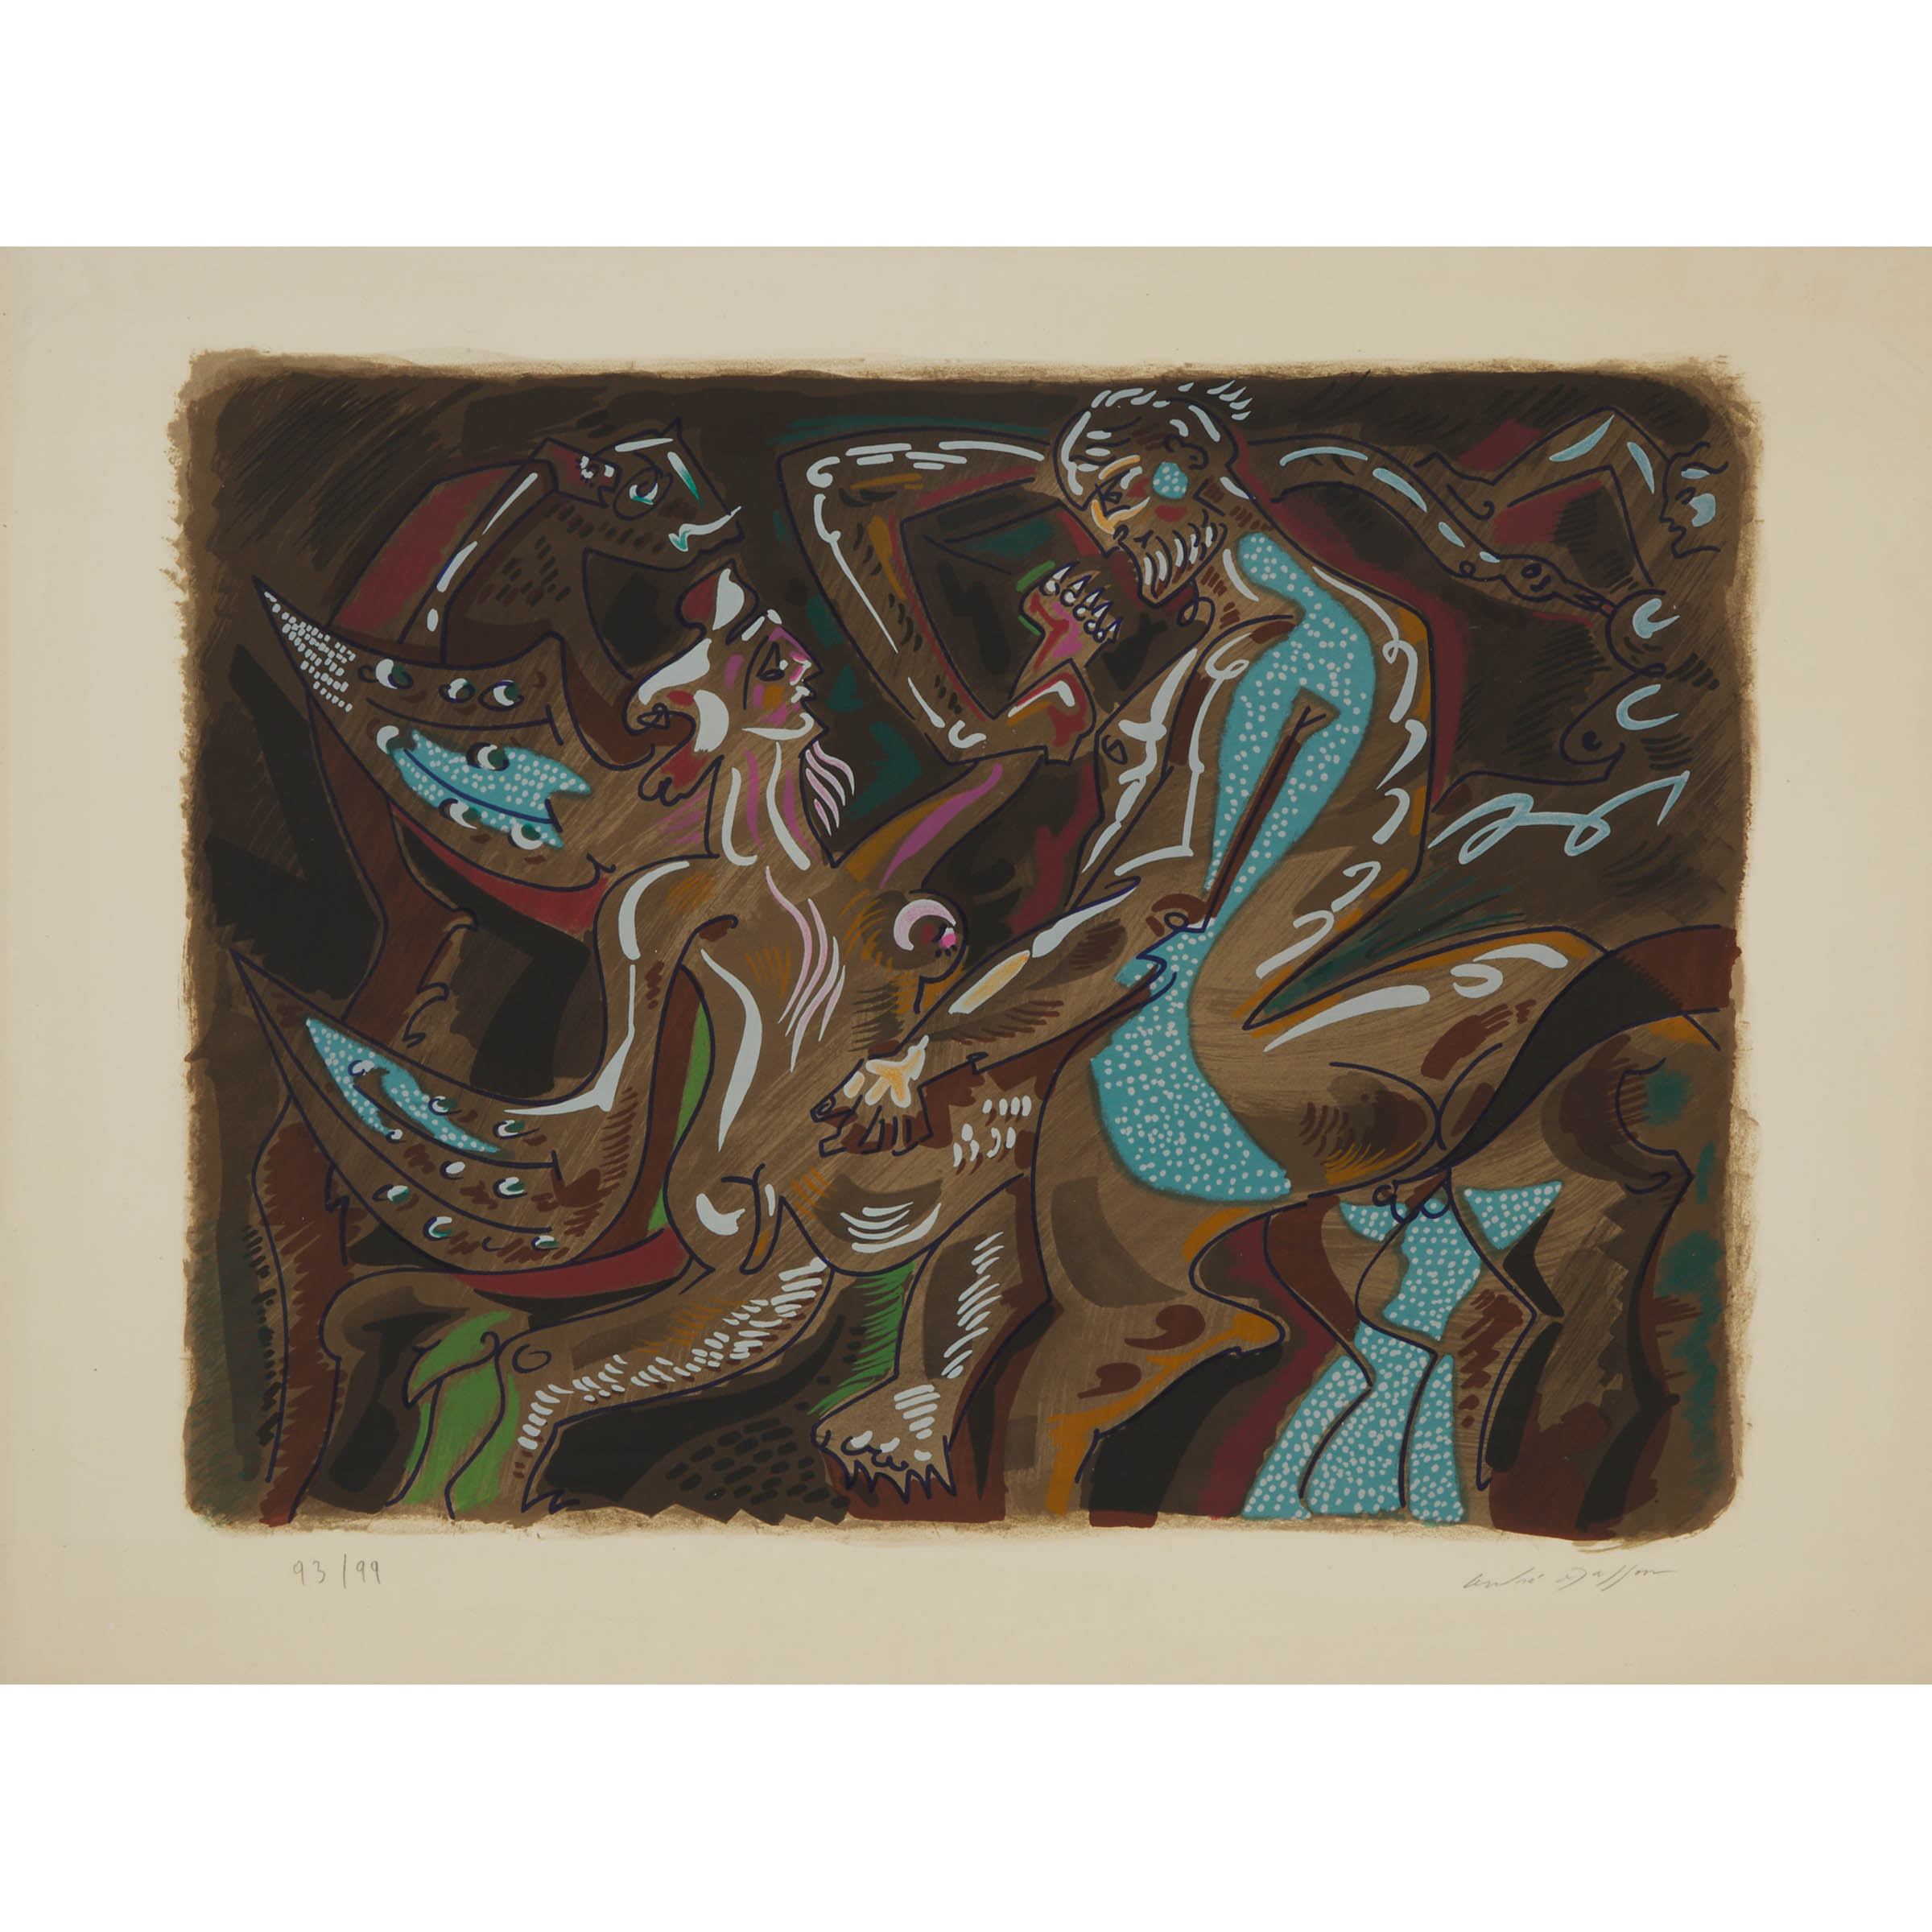 ANDRÉ MASSON (1896-1987), French